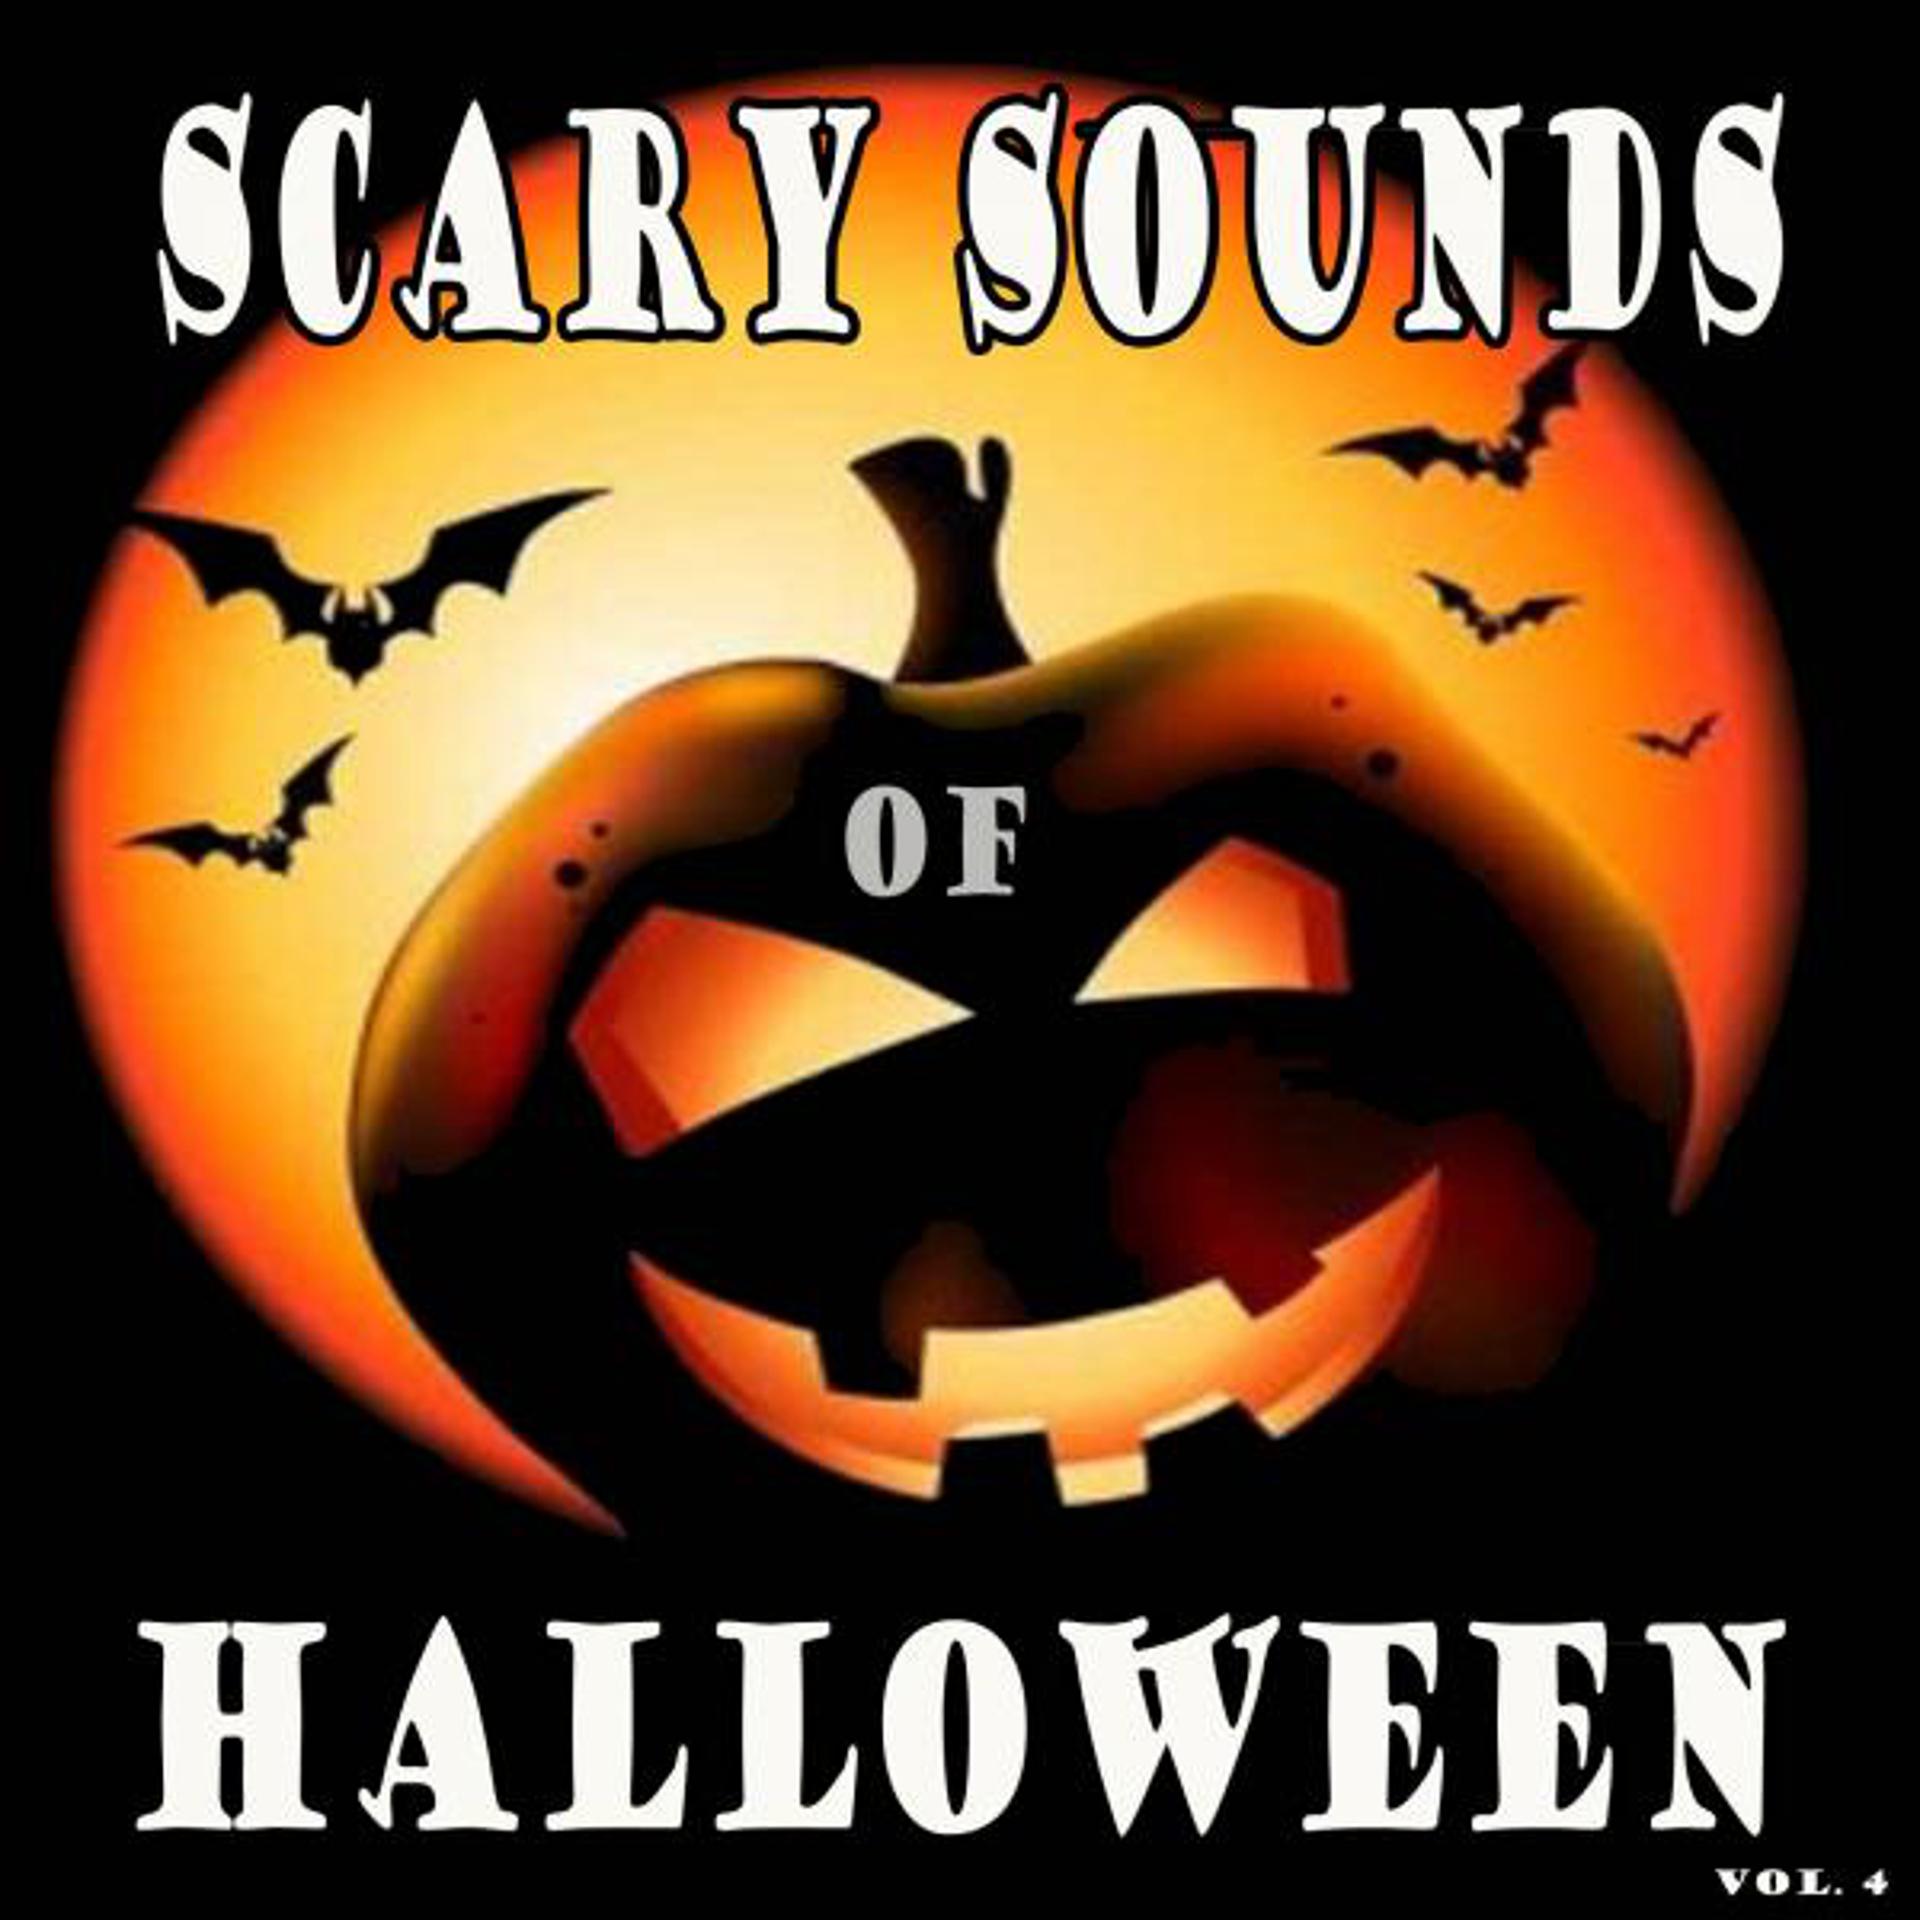 Постер альбома Scary Sounds of Halloween, Scary Halloween Sounds, Vol. 4